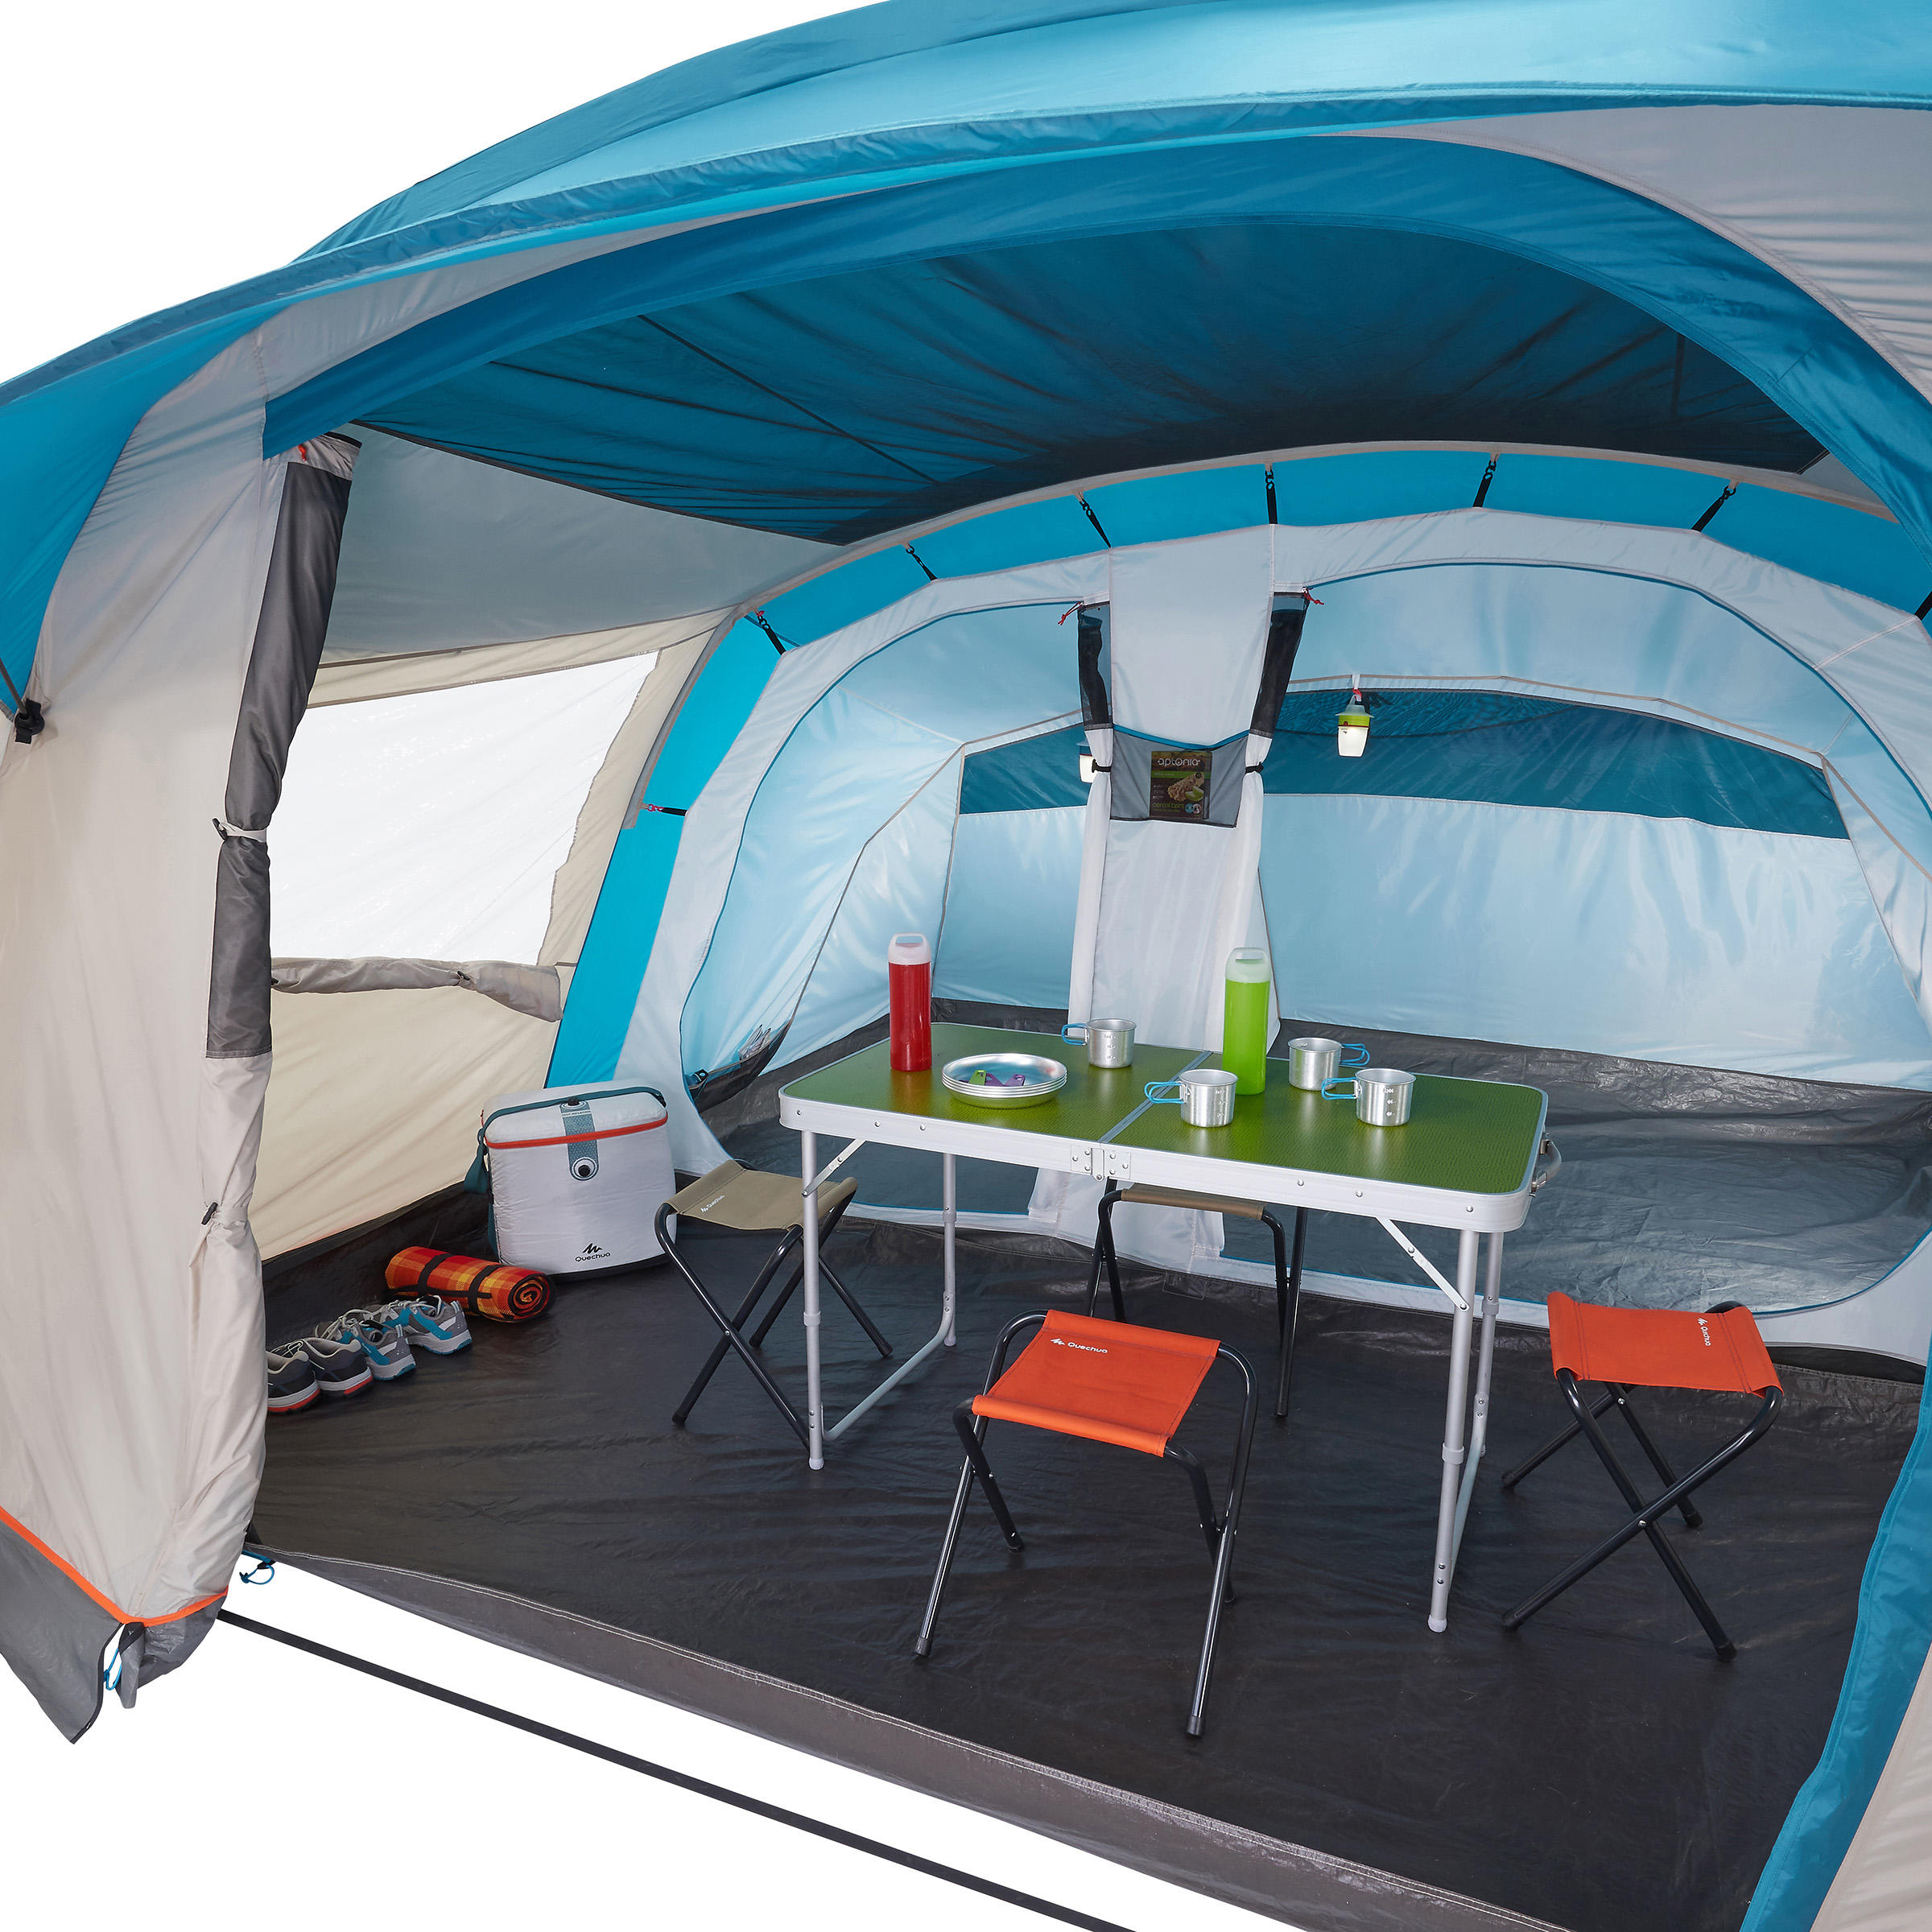 Arpenaz 5.2 Family camping tent _PIPE_ 